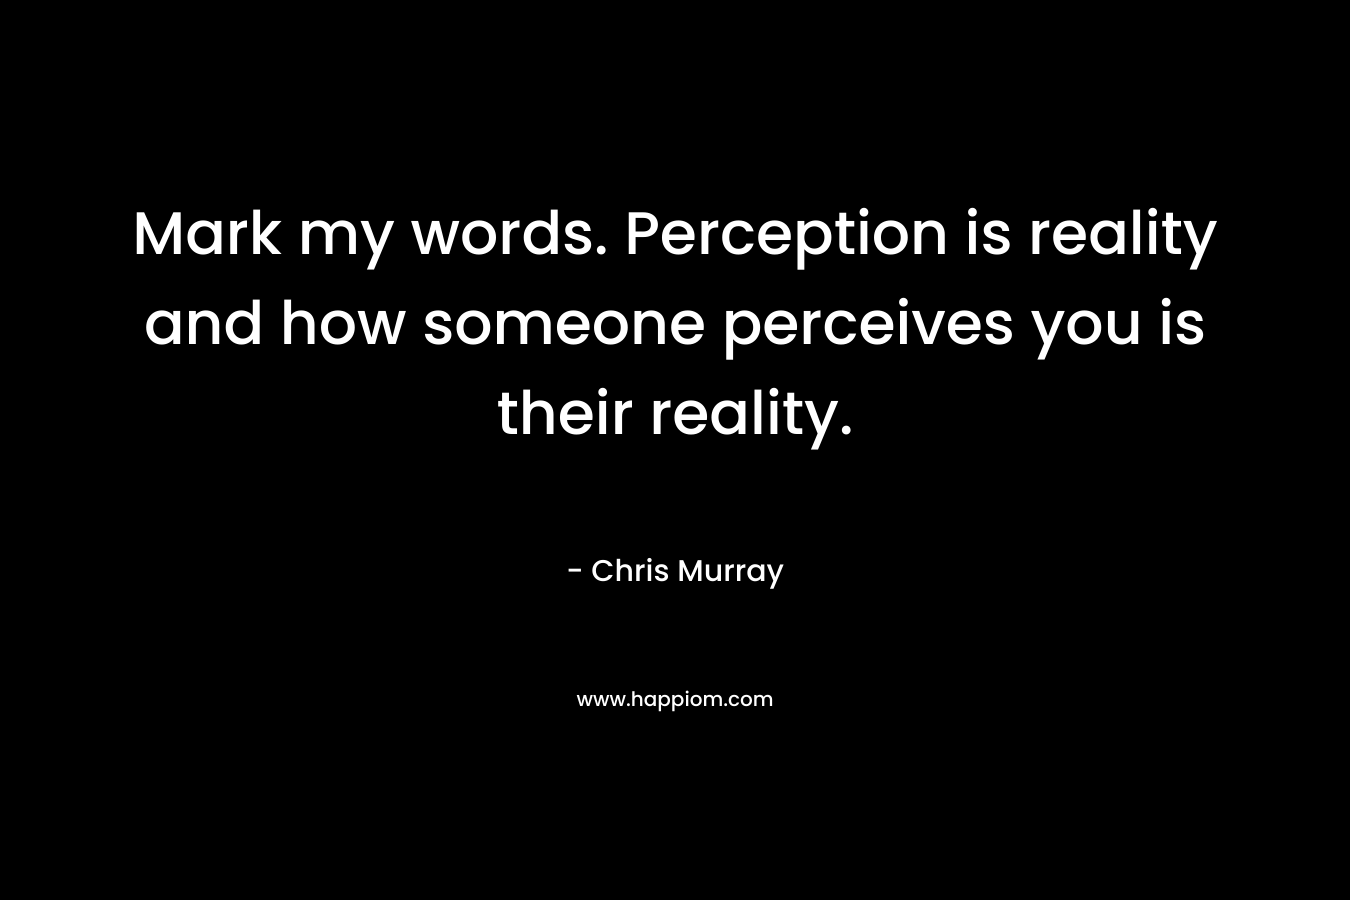 Mark my words. Perception is reality and how someone perceives you is their reality.